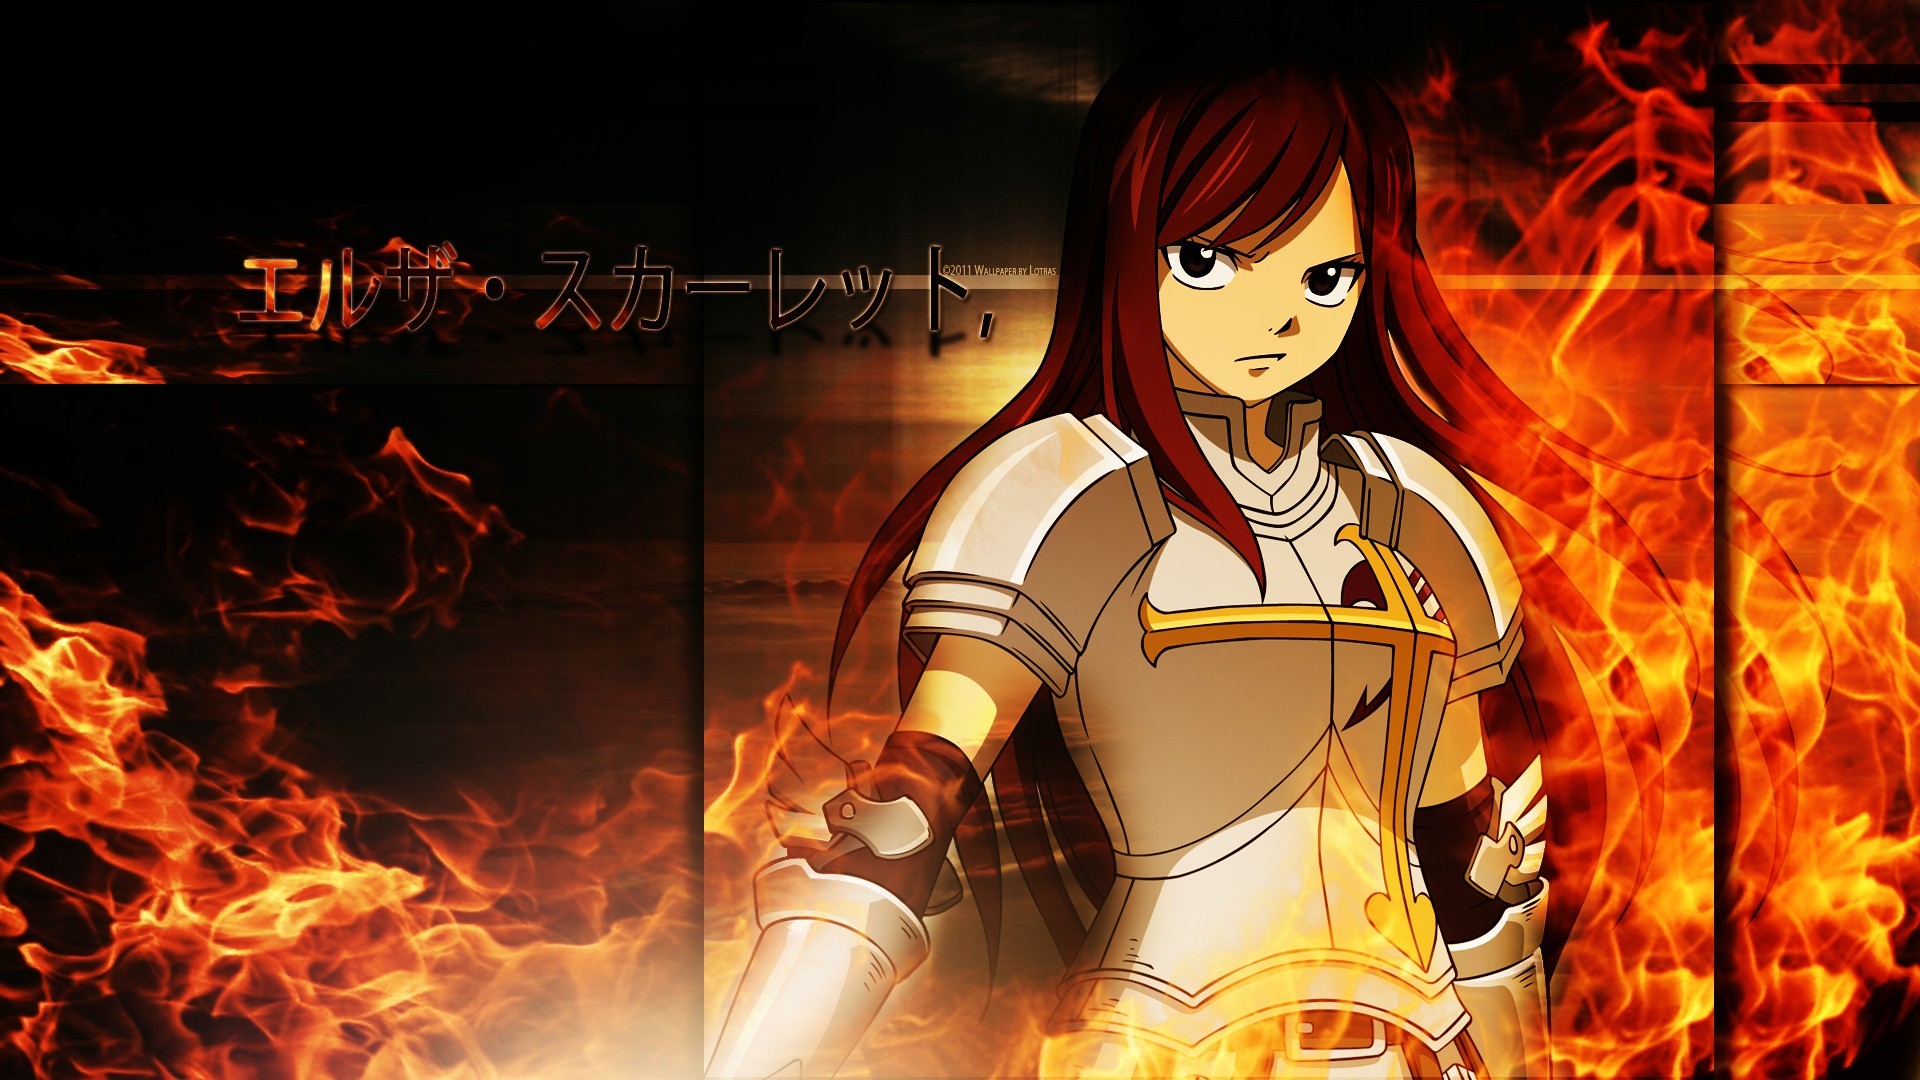 Fairy Tail Anime Wallpaper (79+ images)